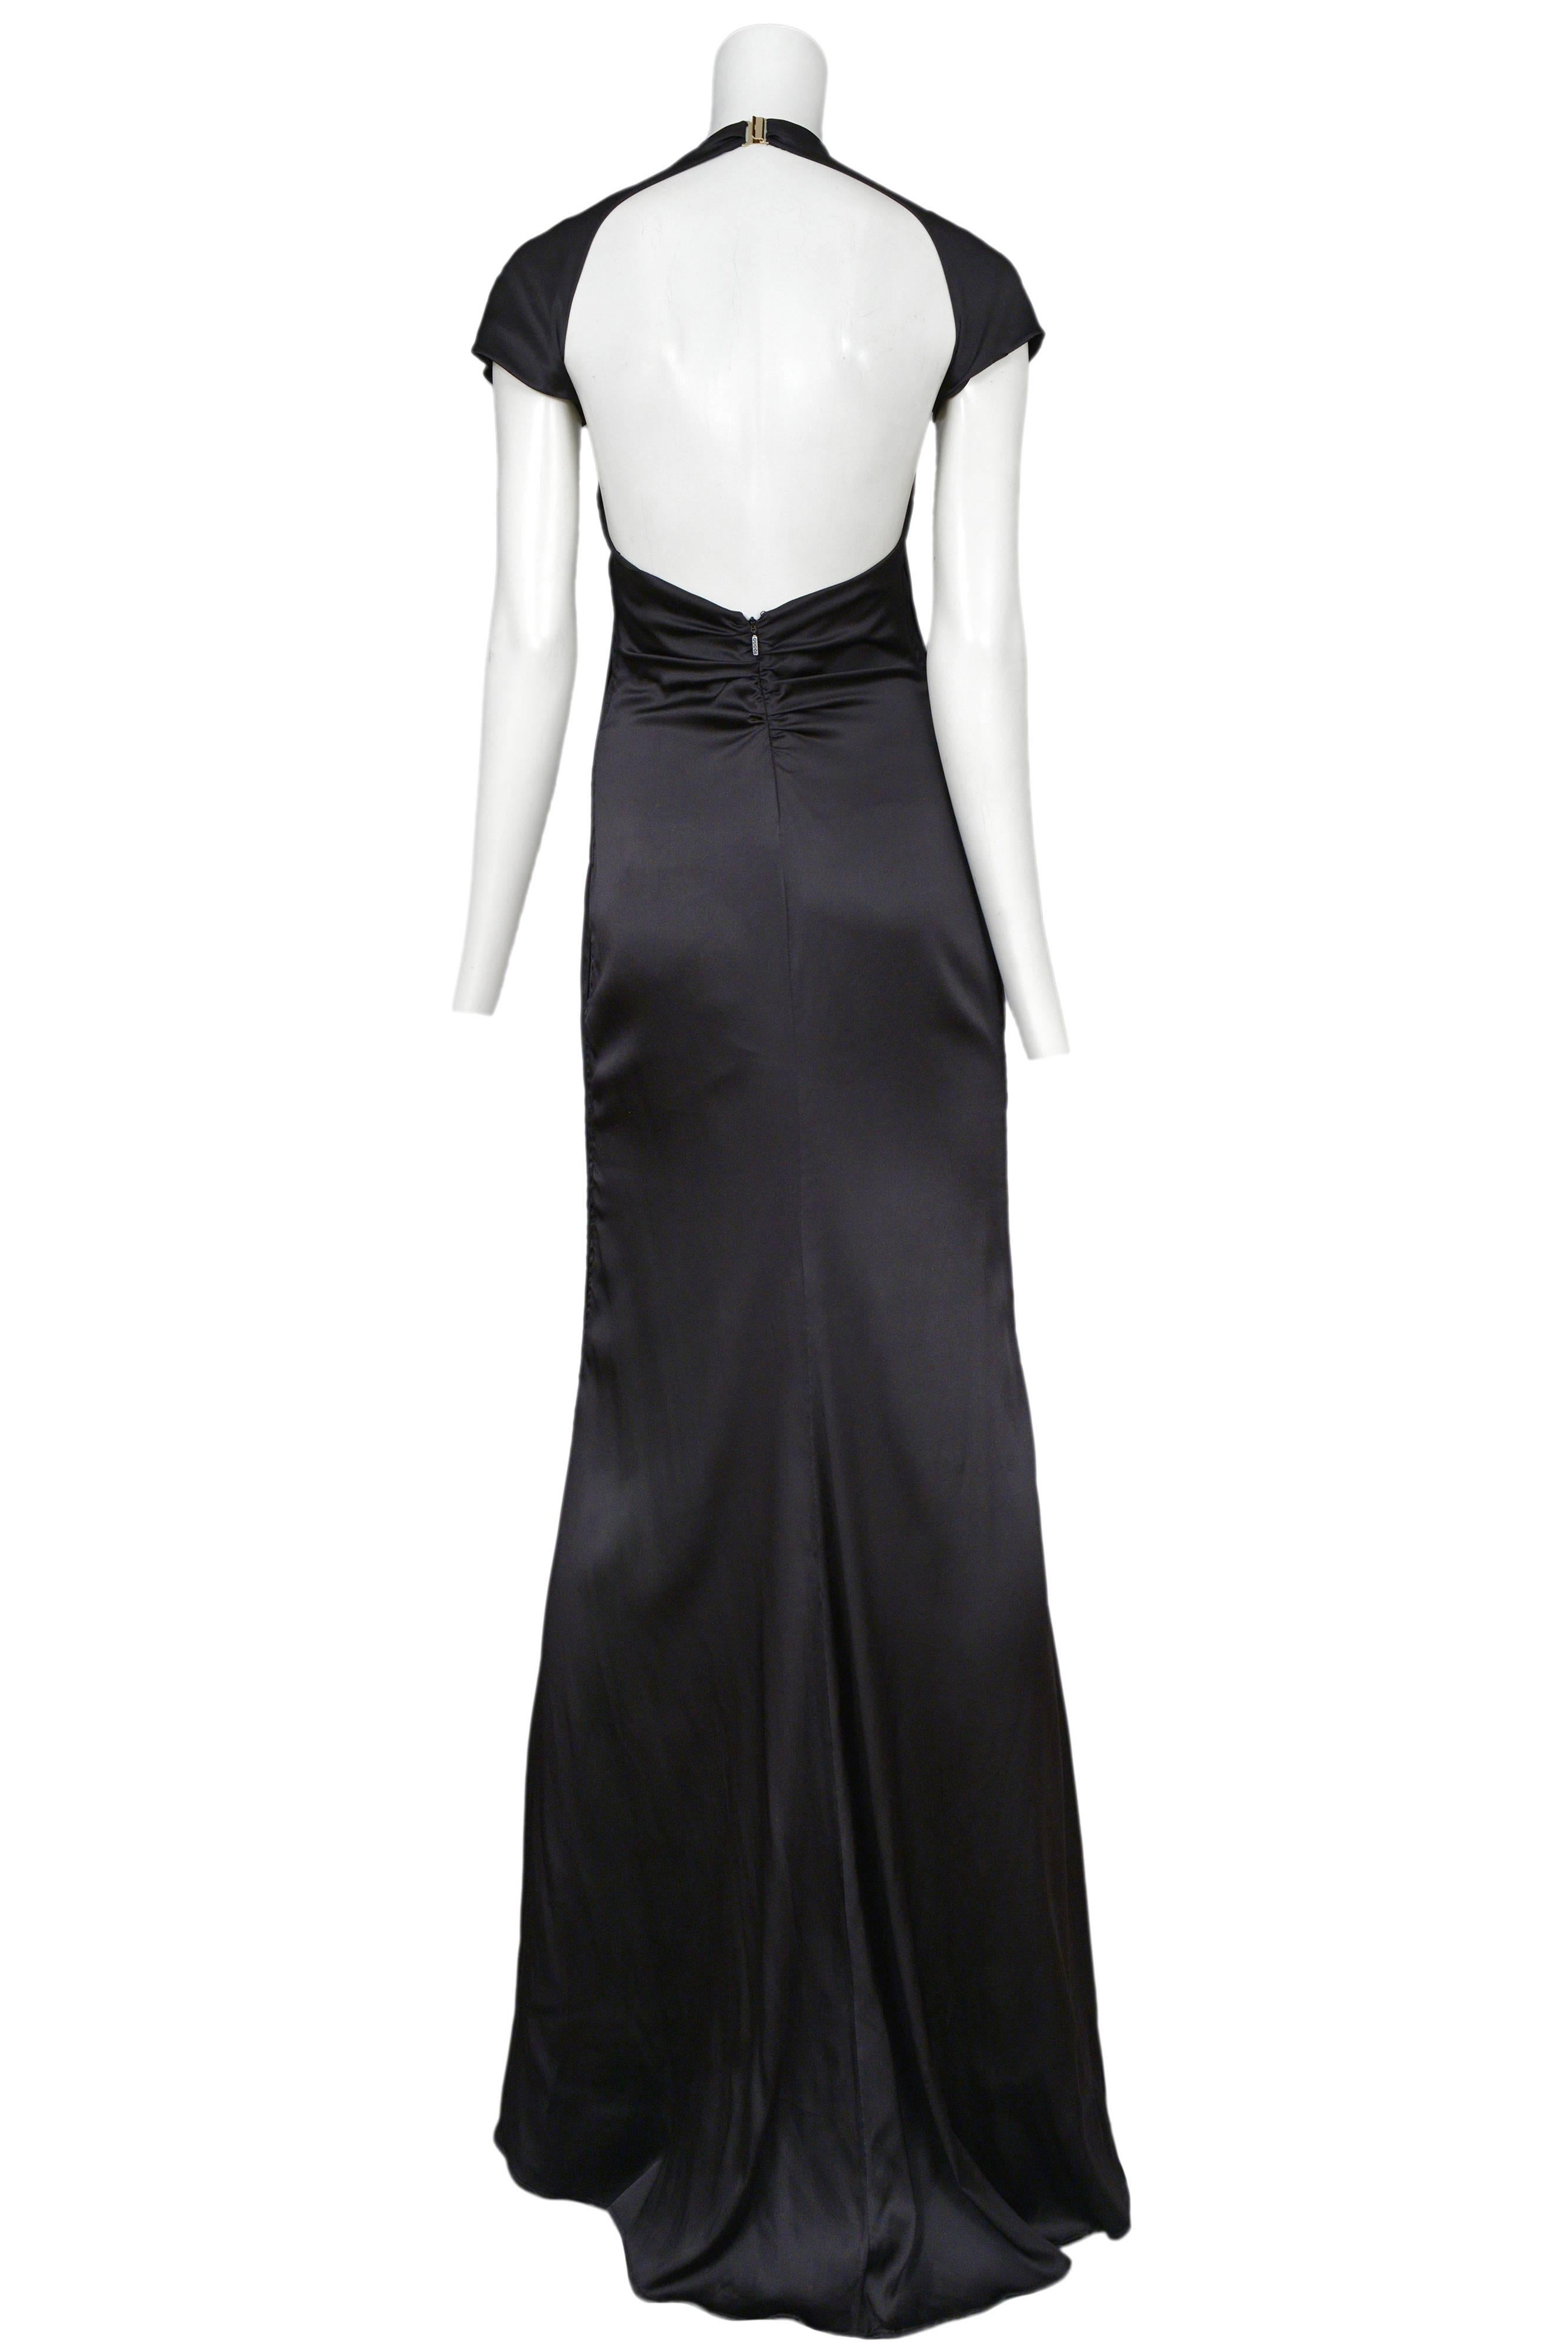 Tom Ford for Gucci Black Satin Knot Gown In Excellent Condition In Los Angeles, CA